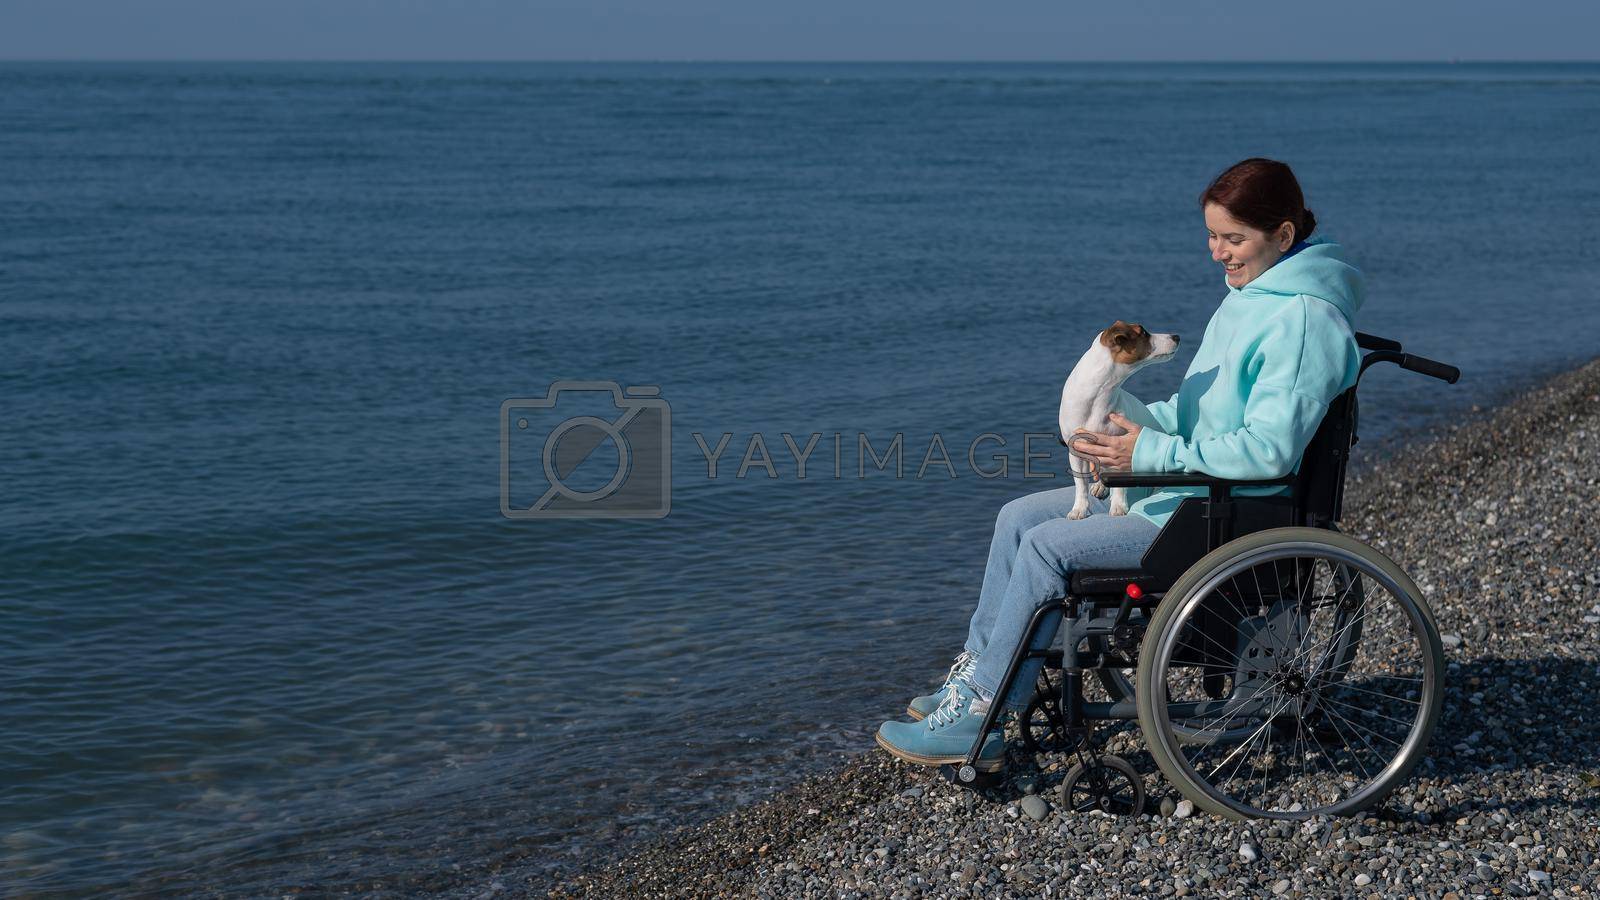 Royalty free image of Caucasian woman in a wheelchair with a dog at the sea. by mrwed54